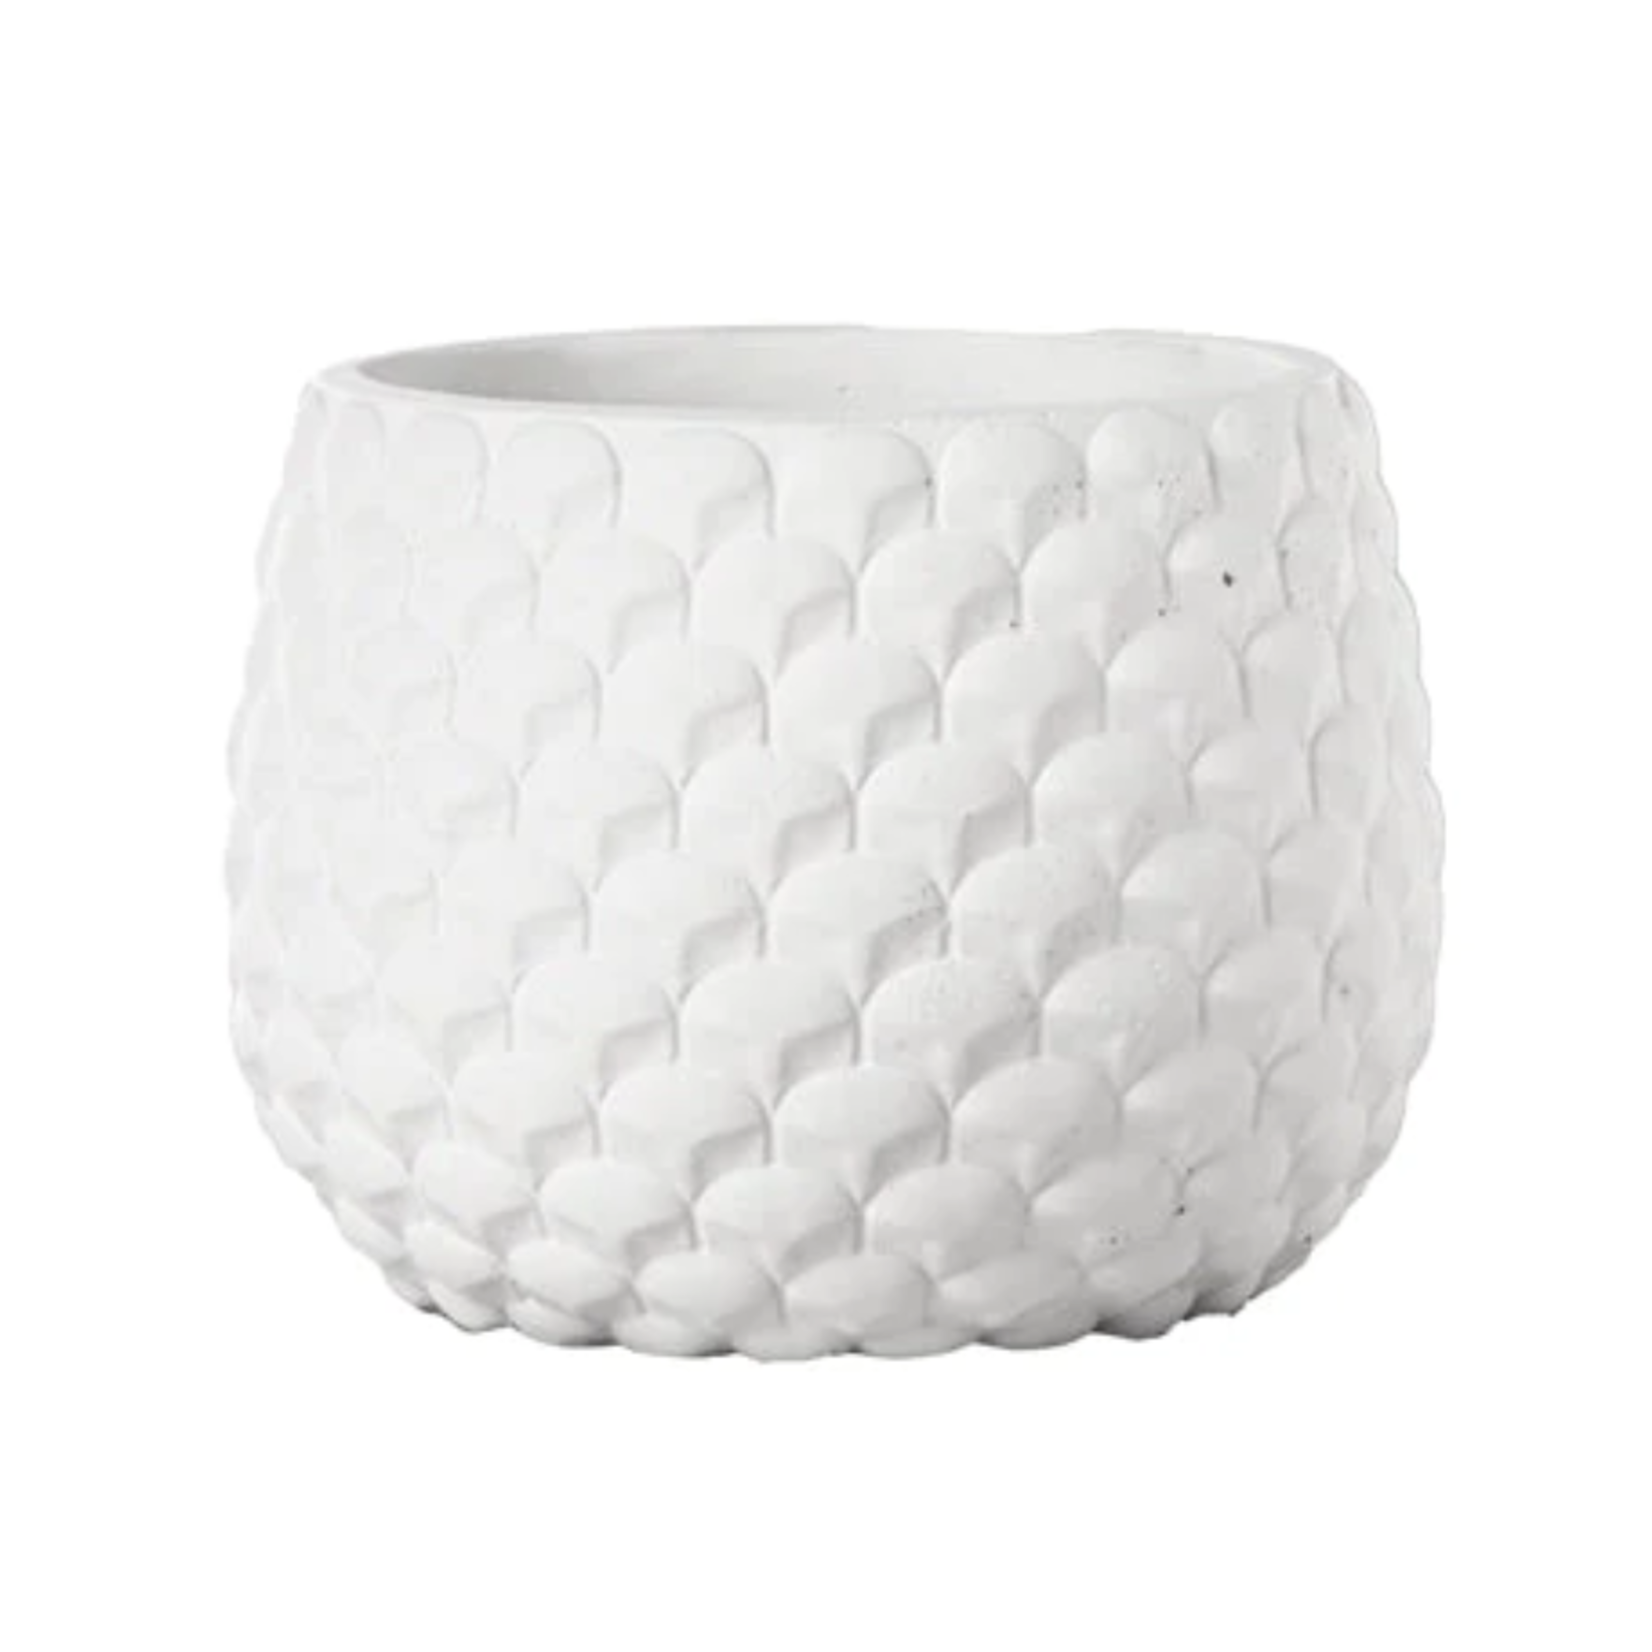 6.25”H X 8” WHITE LARGE Cement Round Pot with Embossed Geometric Pattern Design Body